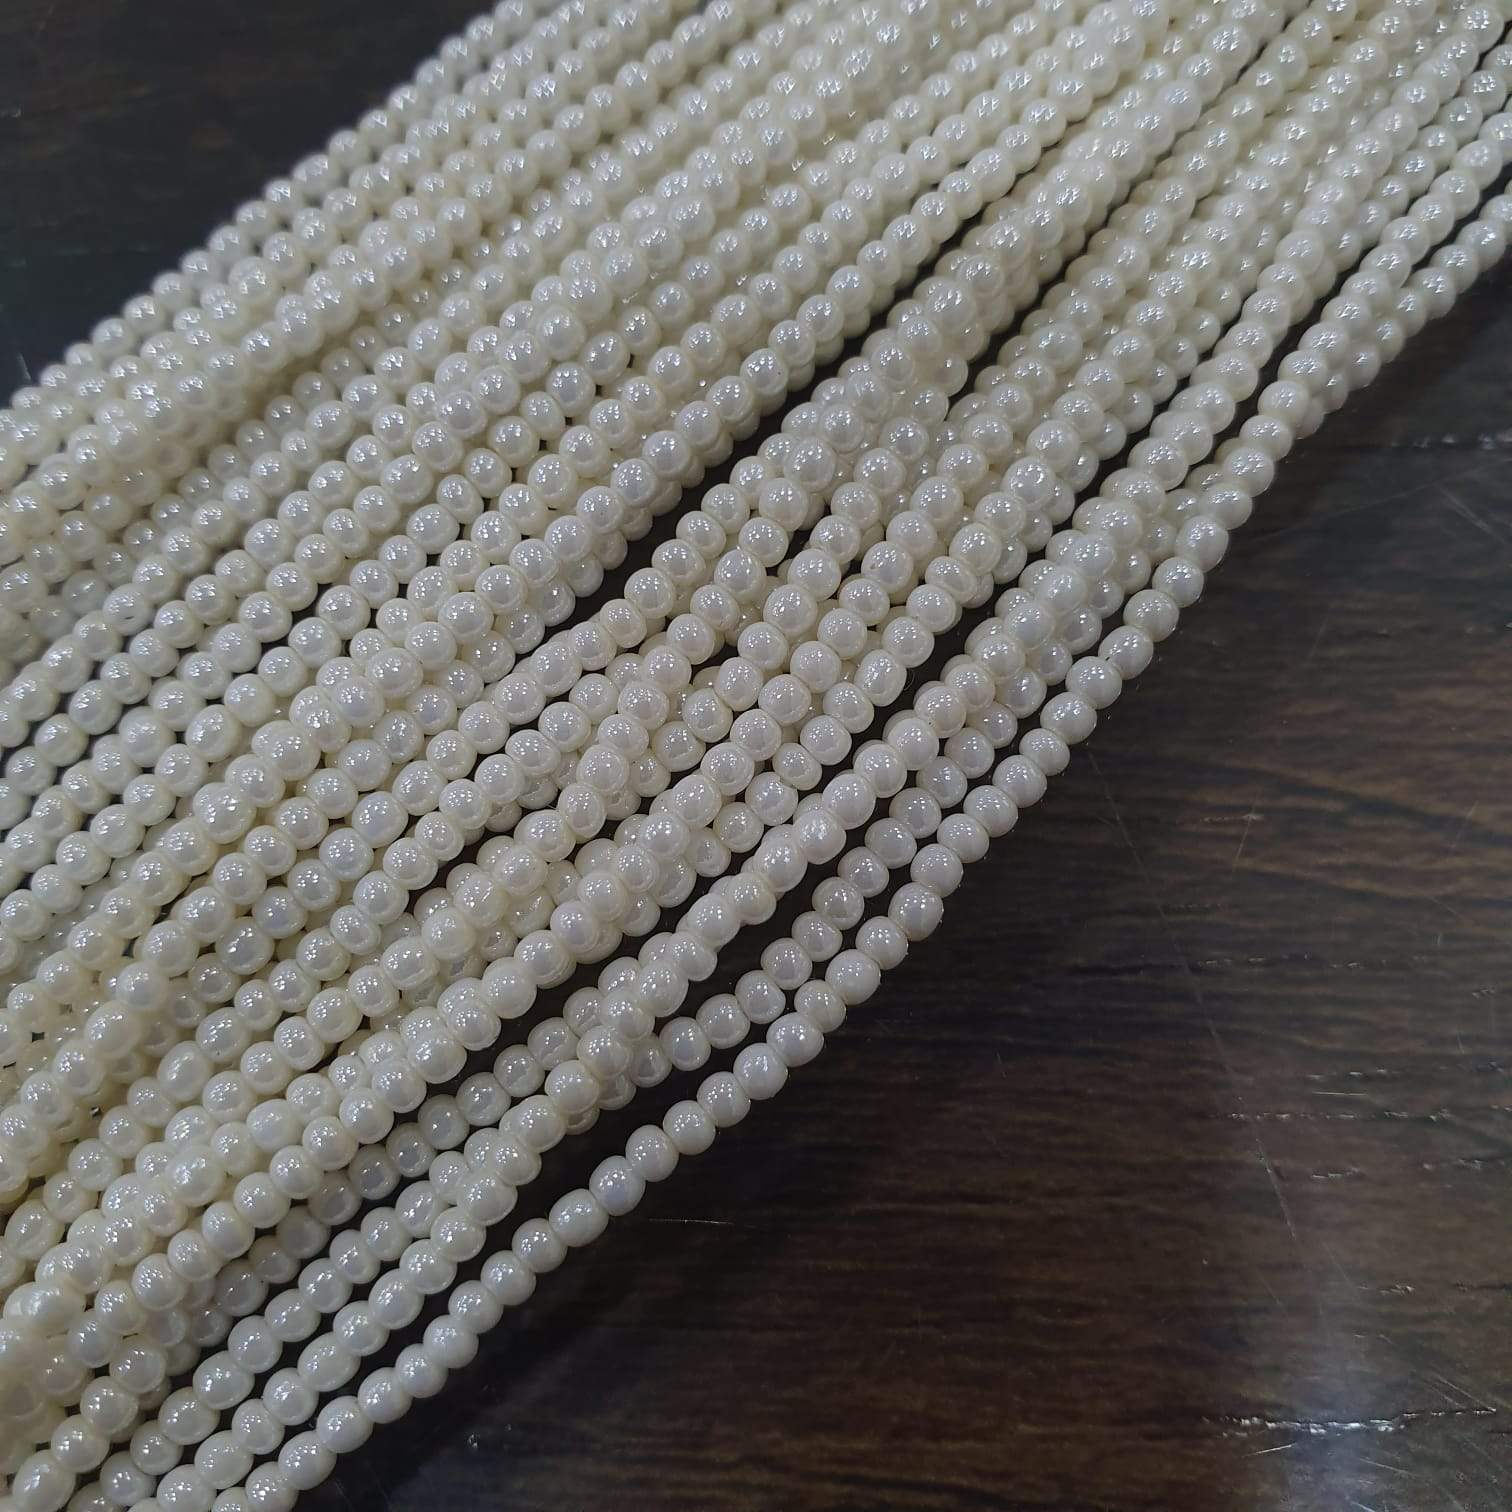 SALE🥳 Fresh Water Pearl Beads Strand 2mm Top Quality 16" Inches - The LabradoriteKing